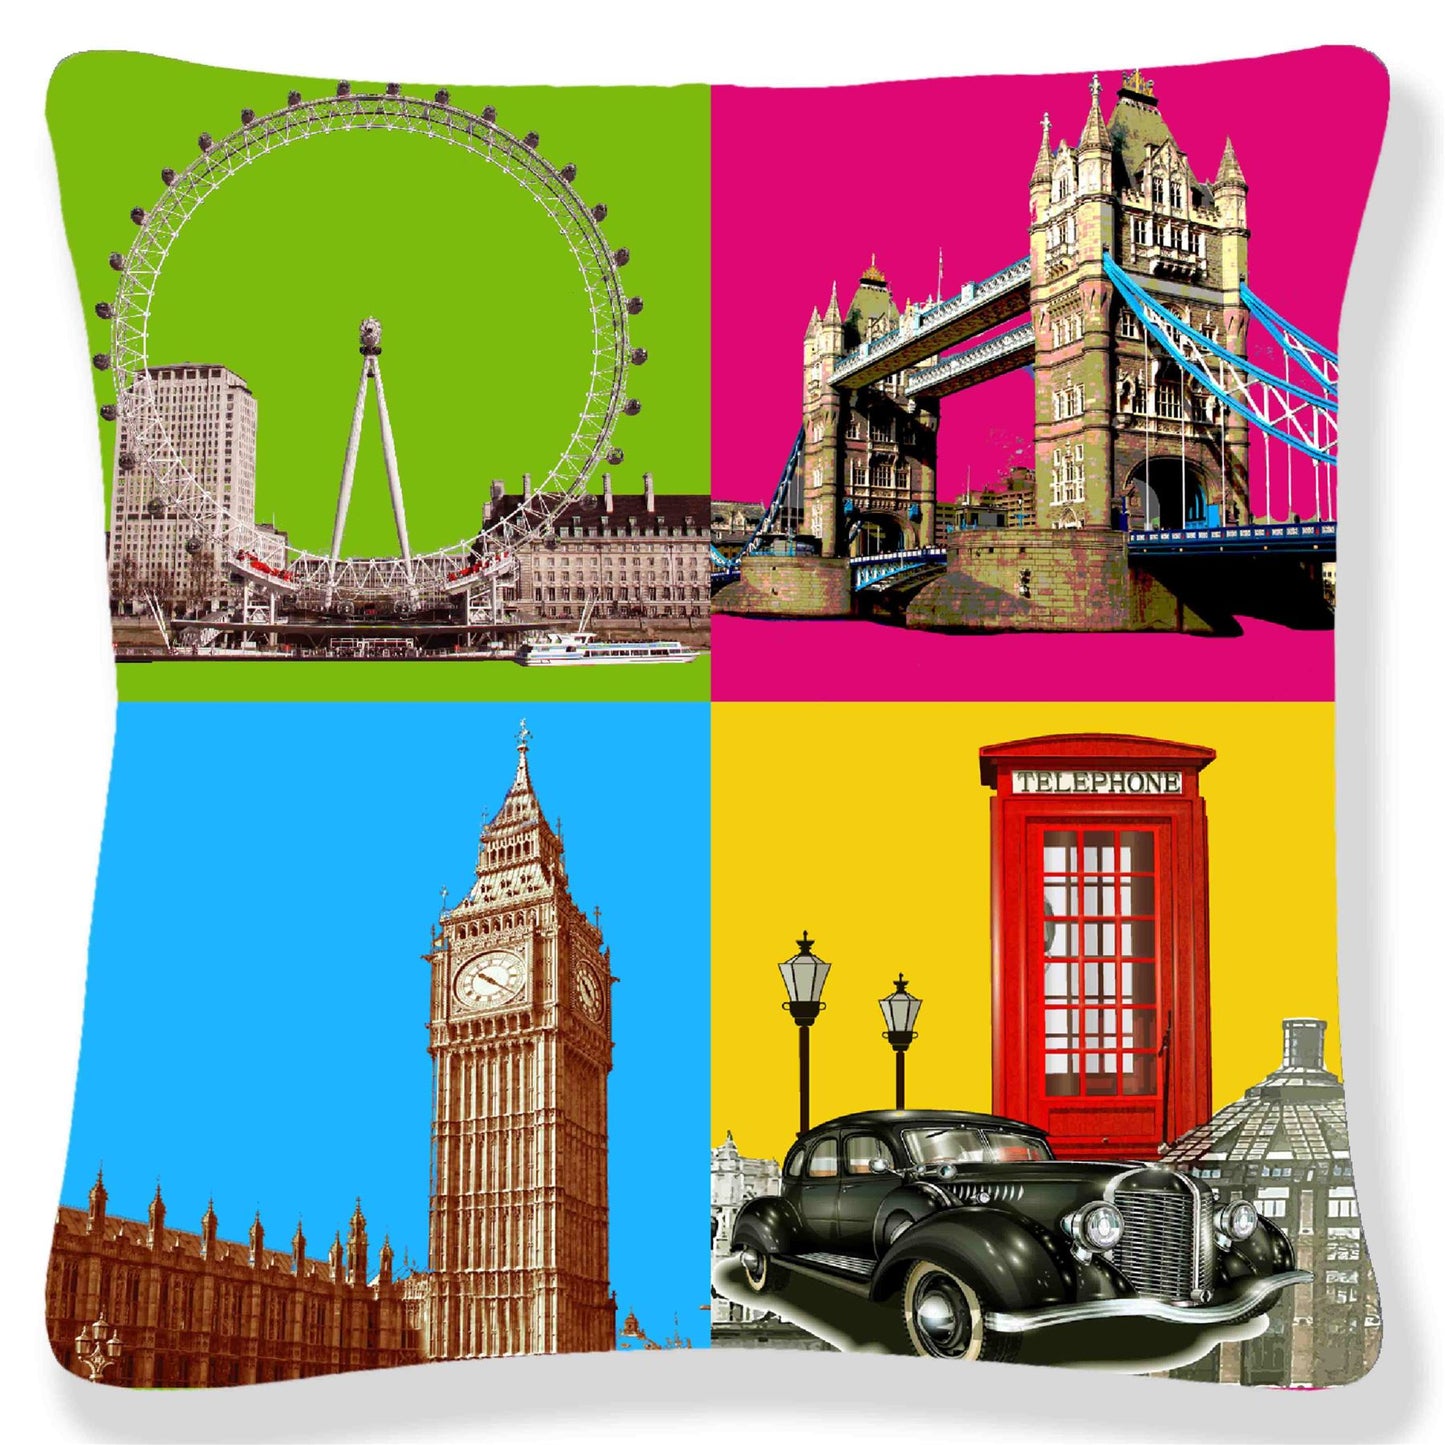 Add Some Pop to Your Decor with a Printed Cushion Cover